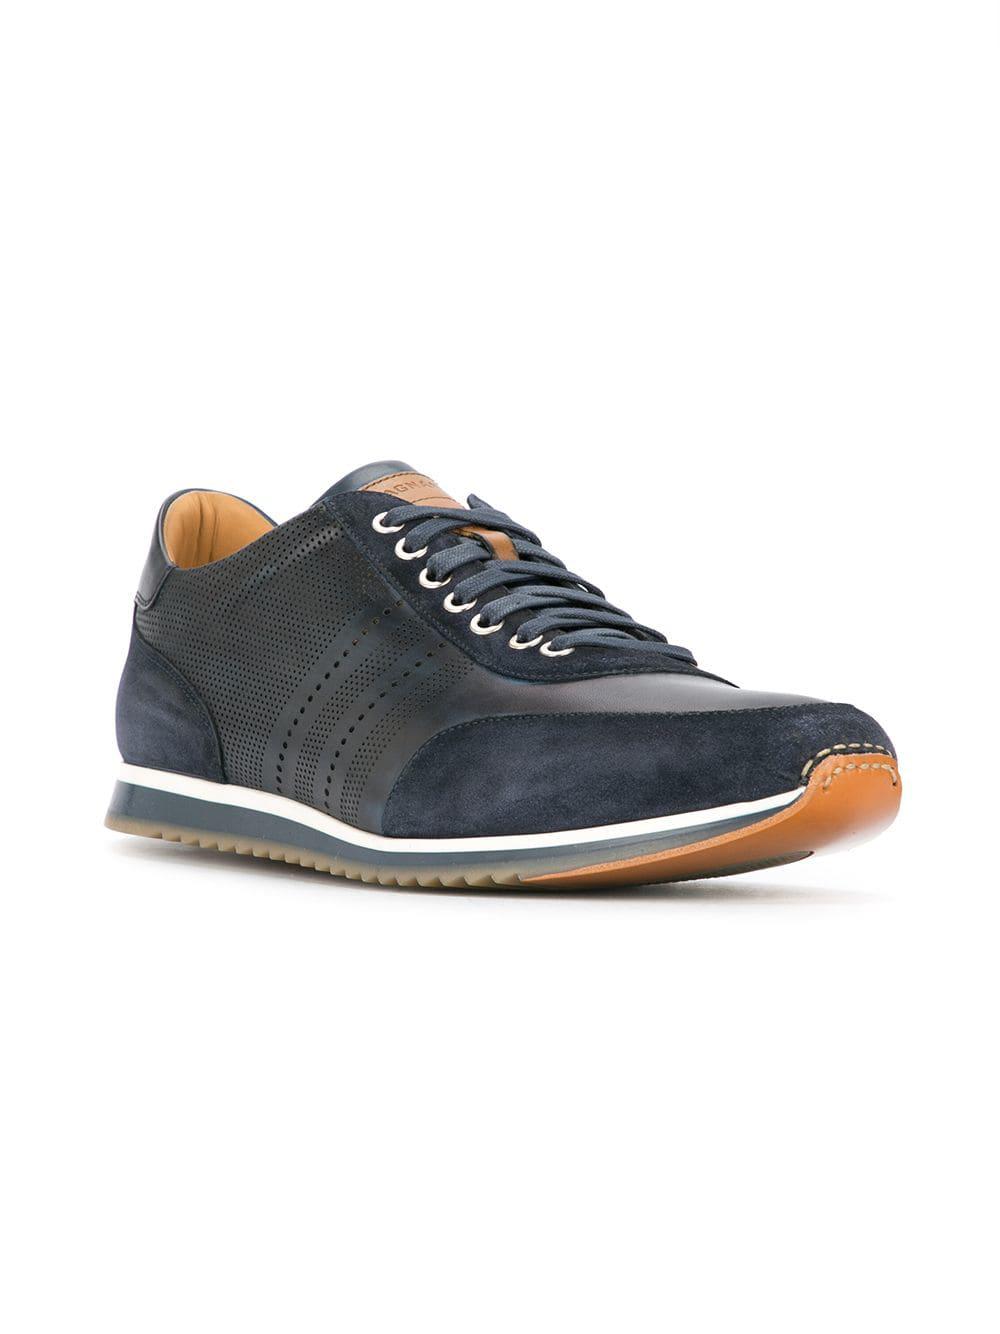 Magnanni Leather Logo Detail Sneakers in Blue for Men - Lyst